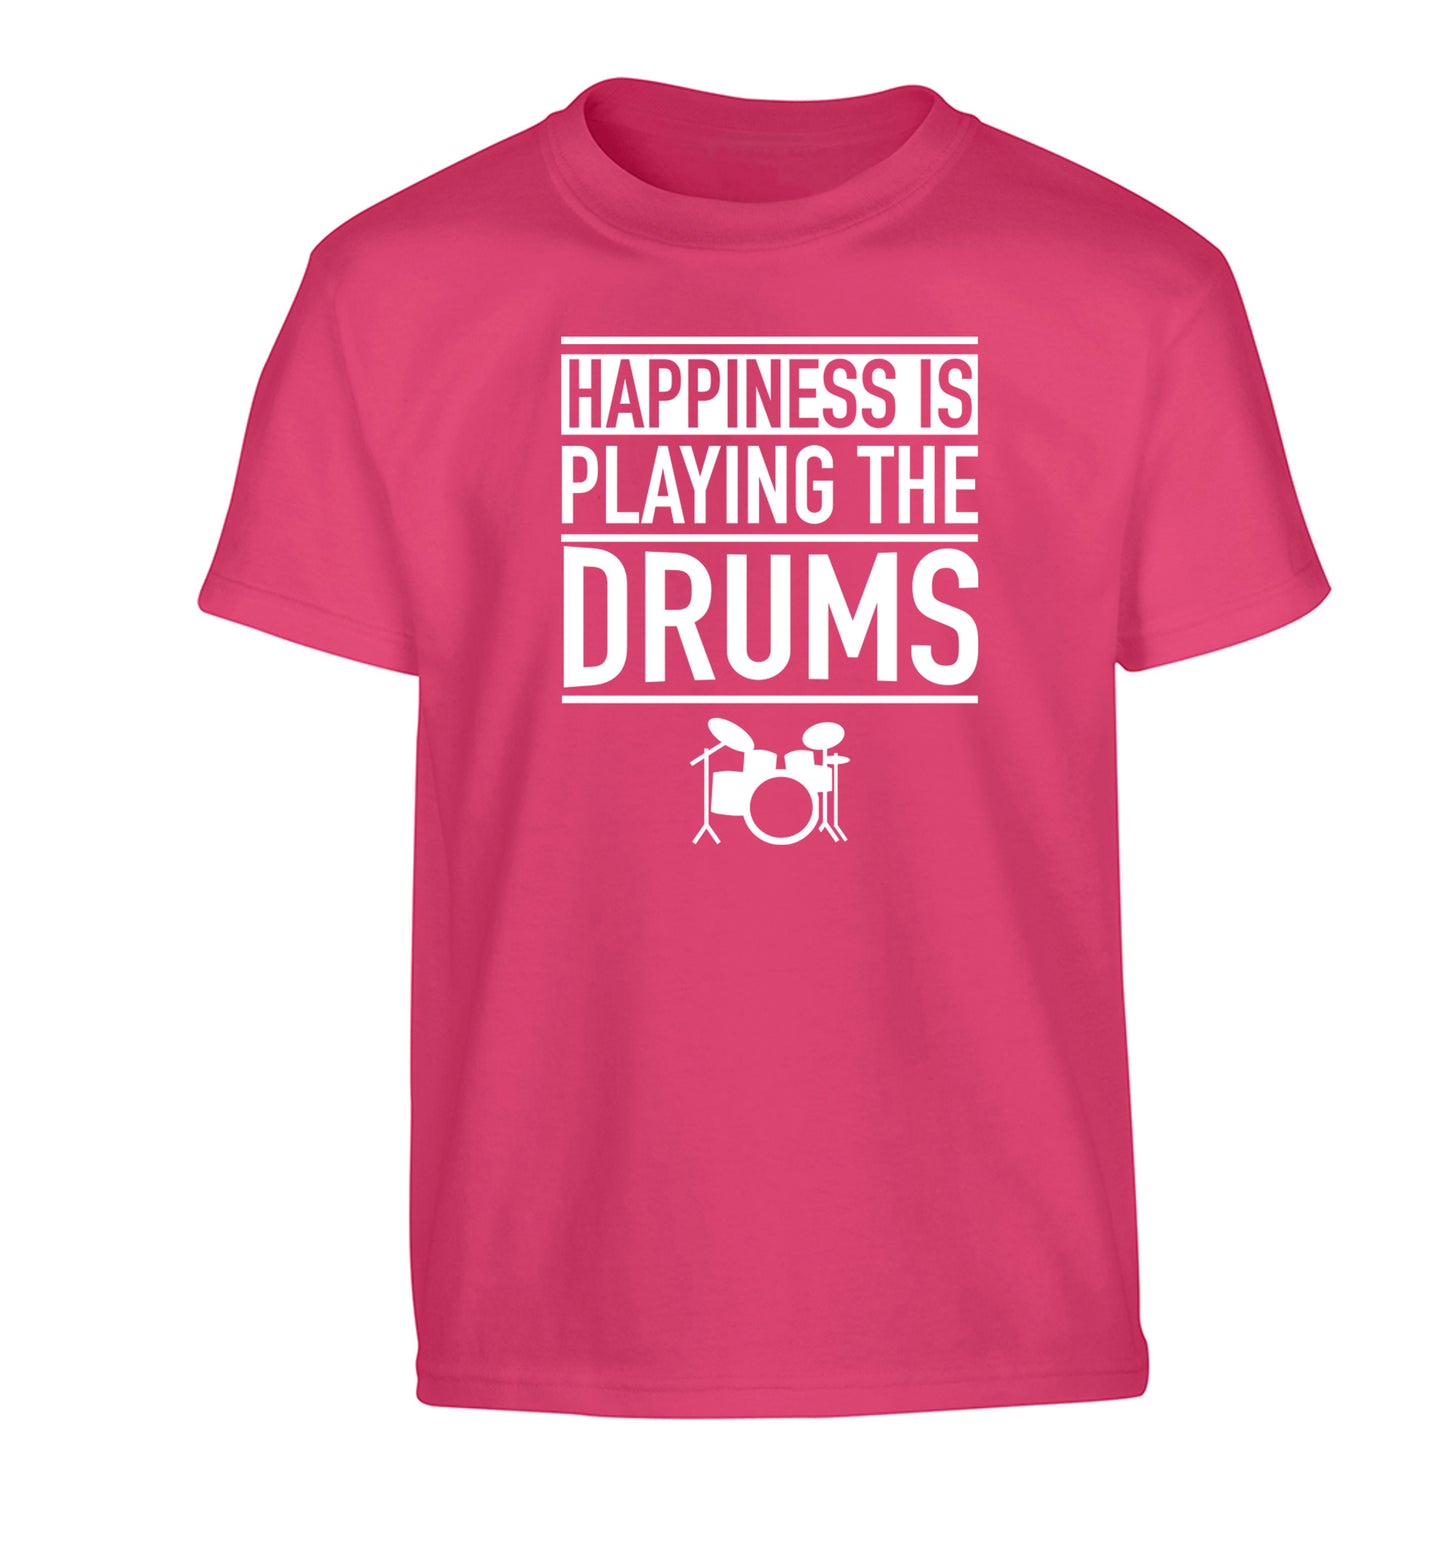 Happiness is playing the drums Children's pink Tshirt 12-14 Years